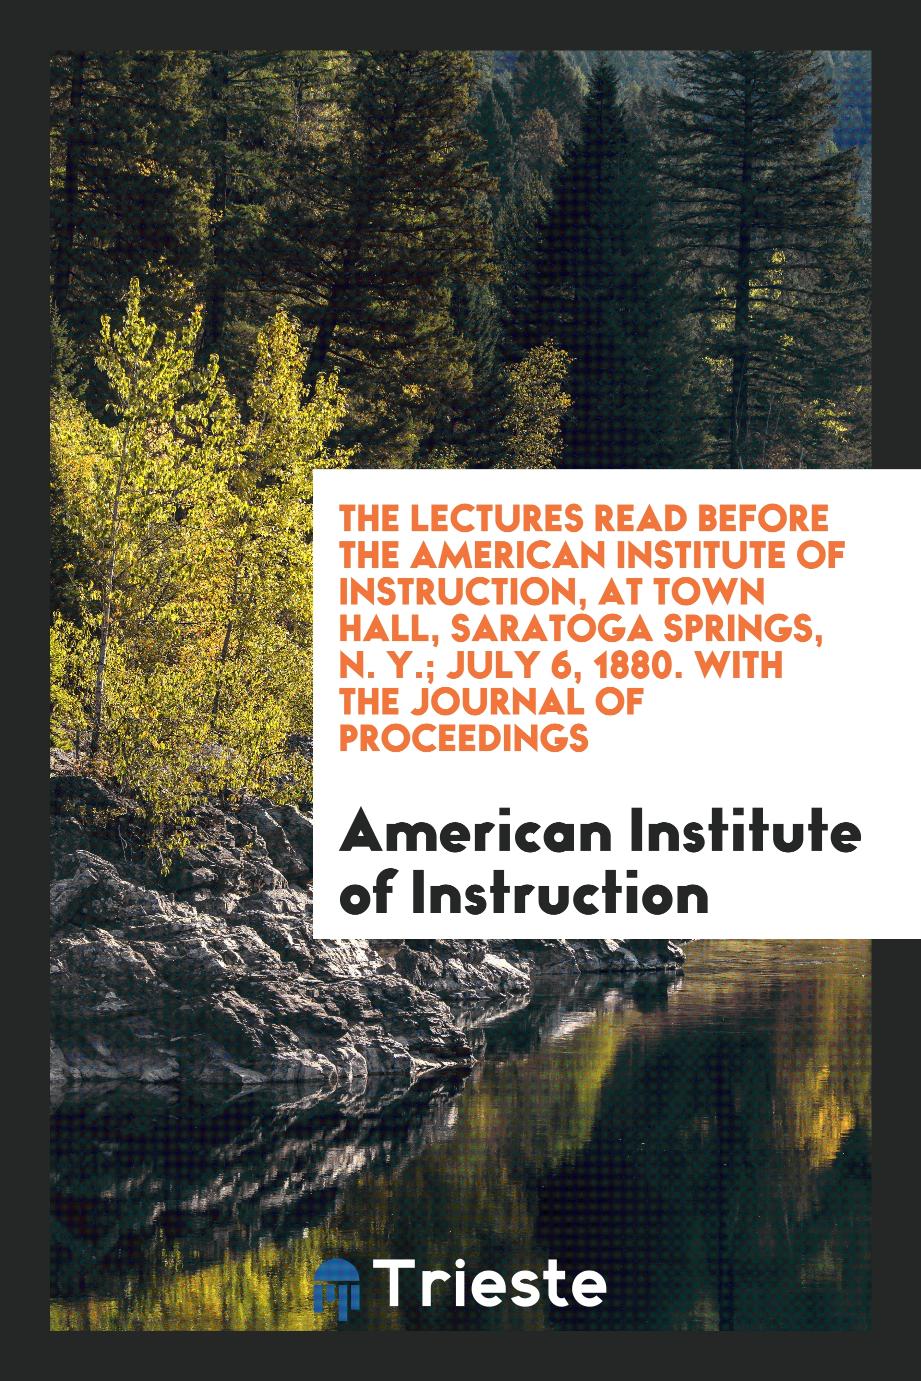 The Lectures Read Before the American Institute of Instruction, at Town Hall, Saratoga Springs, N. Y.; July 6, 1880. With the Journal of Proceedings